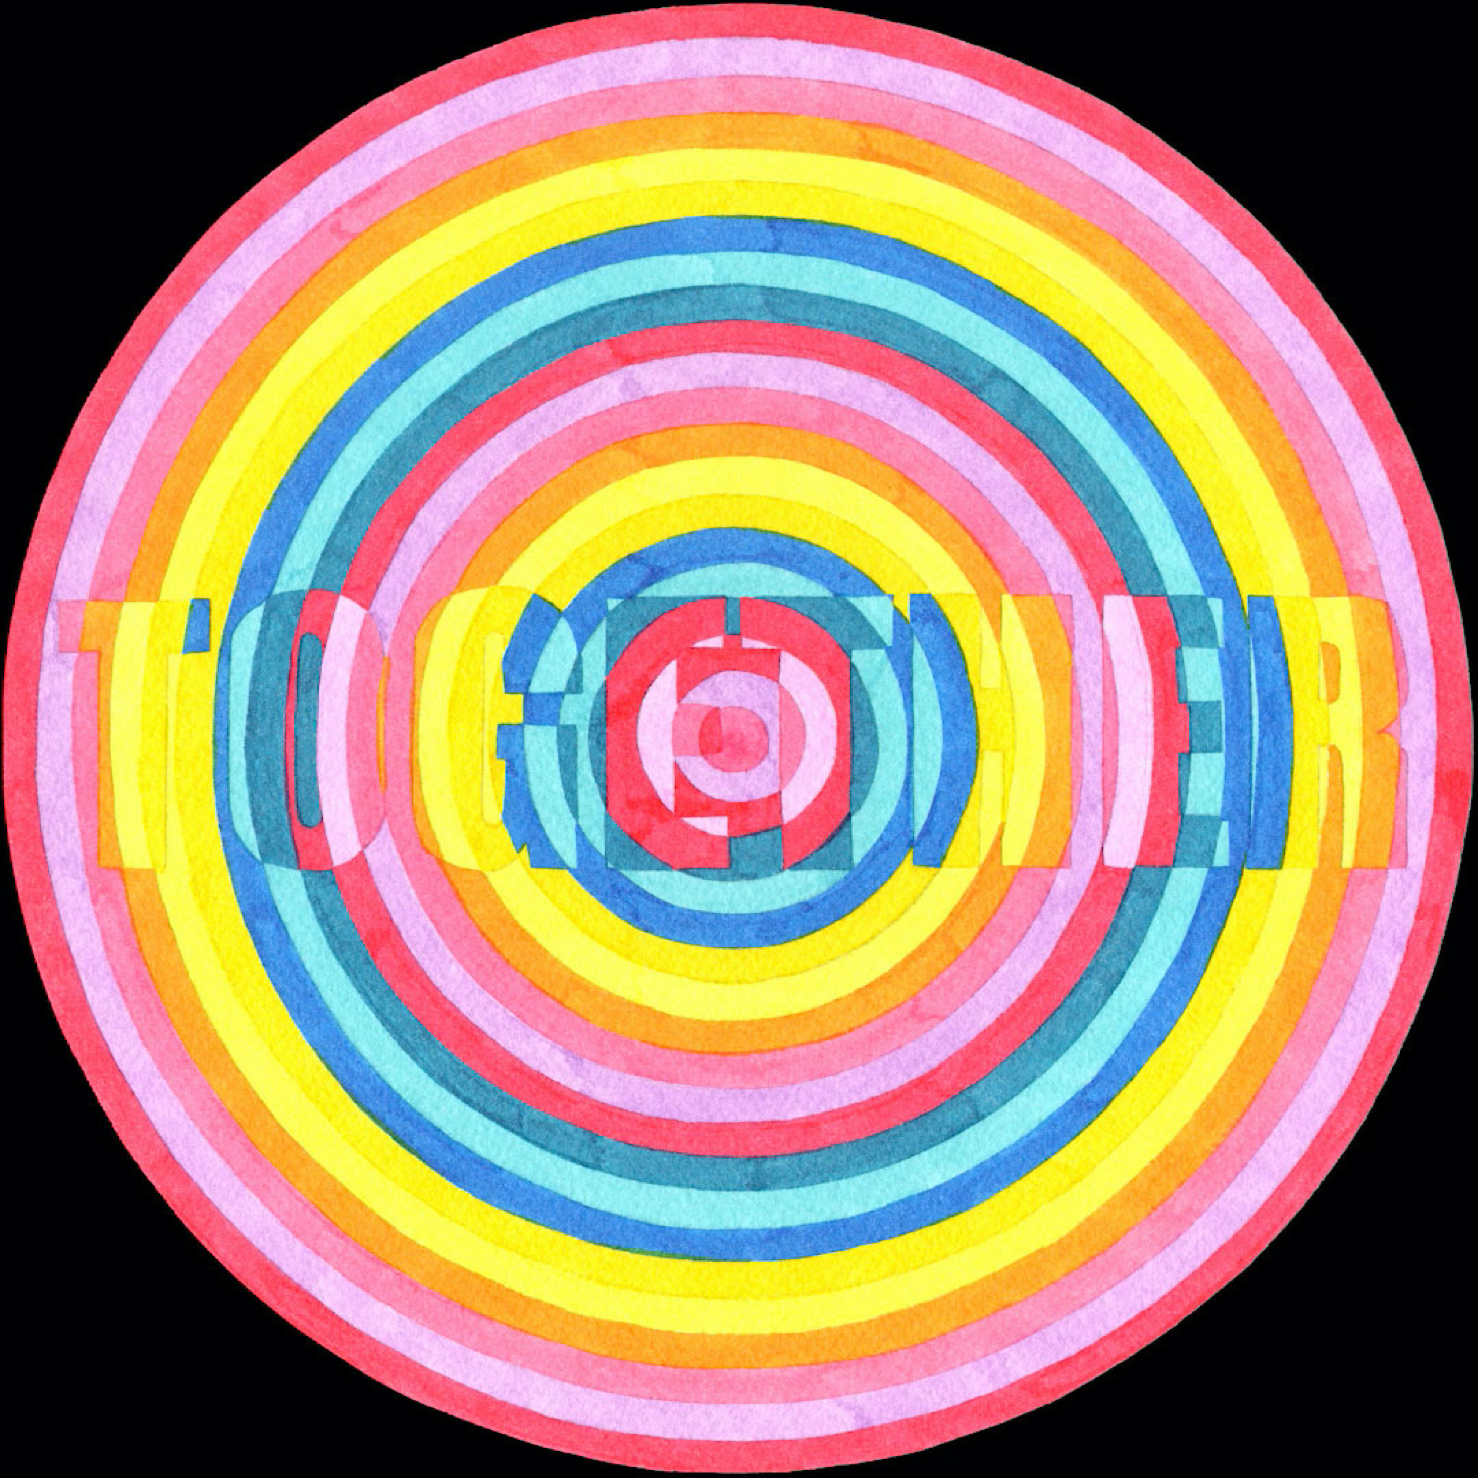 Bright coloured circular artwork with the word 'TOGETHER' faintly legible